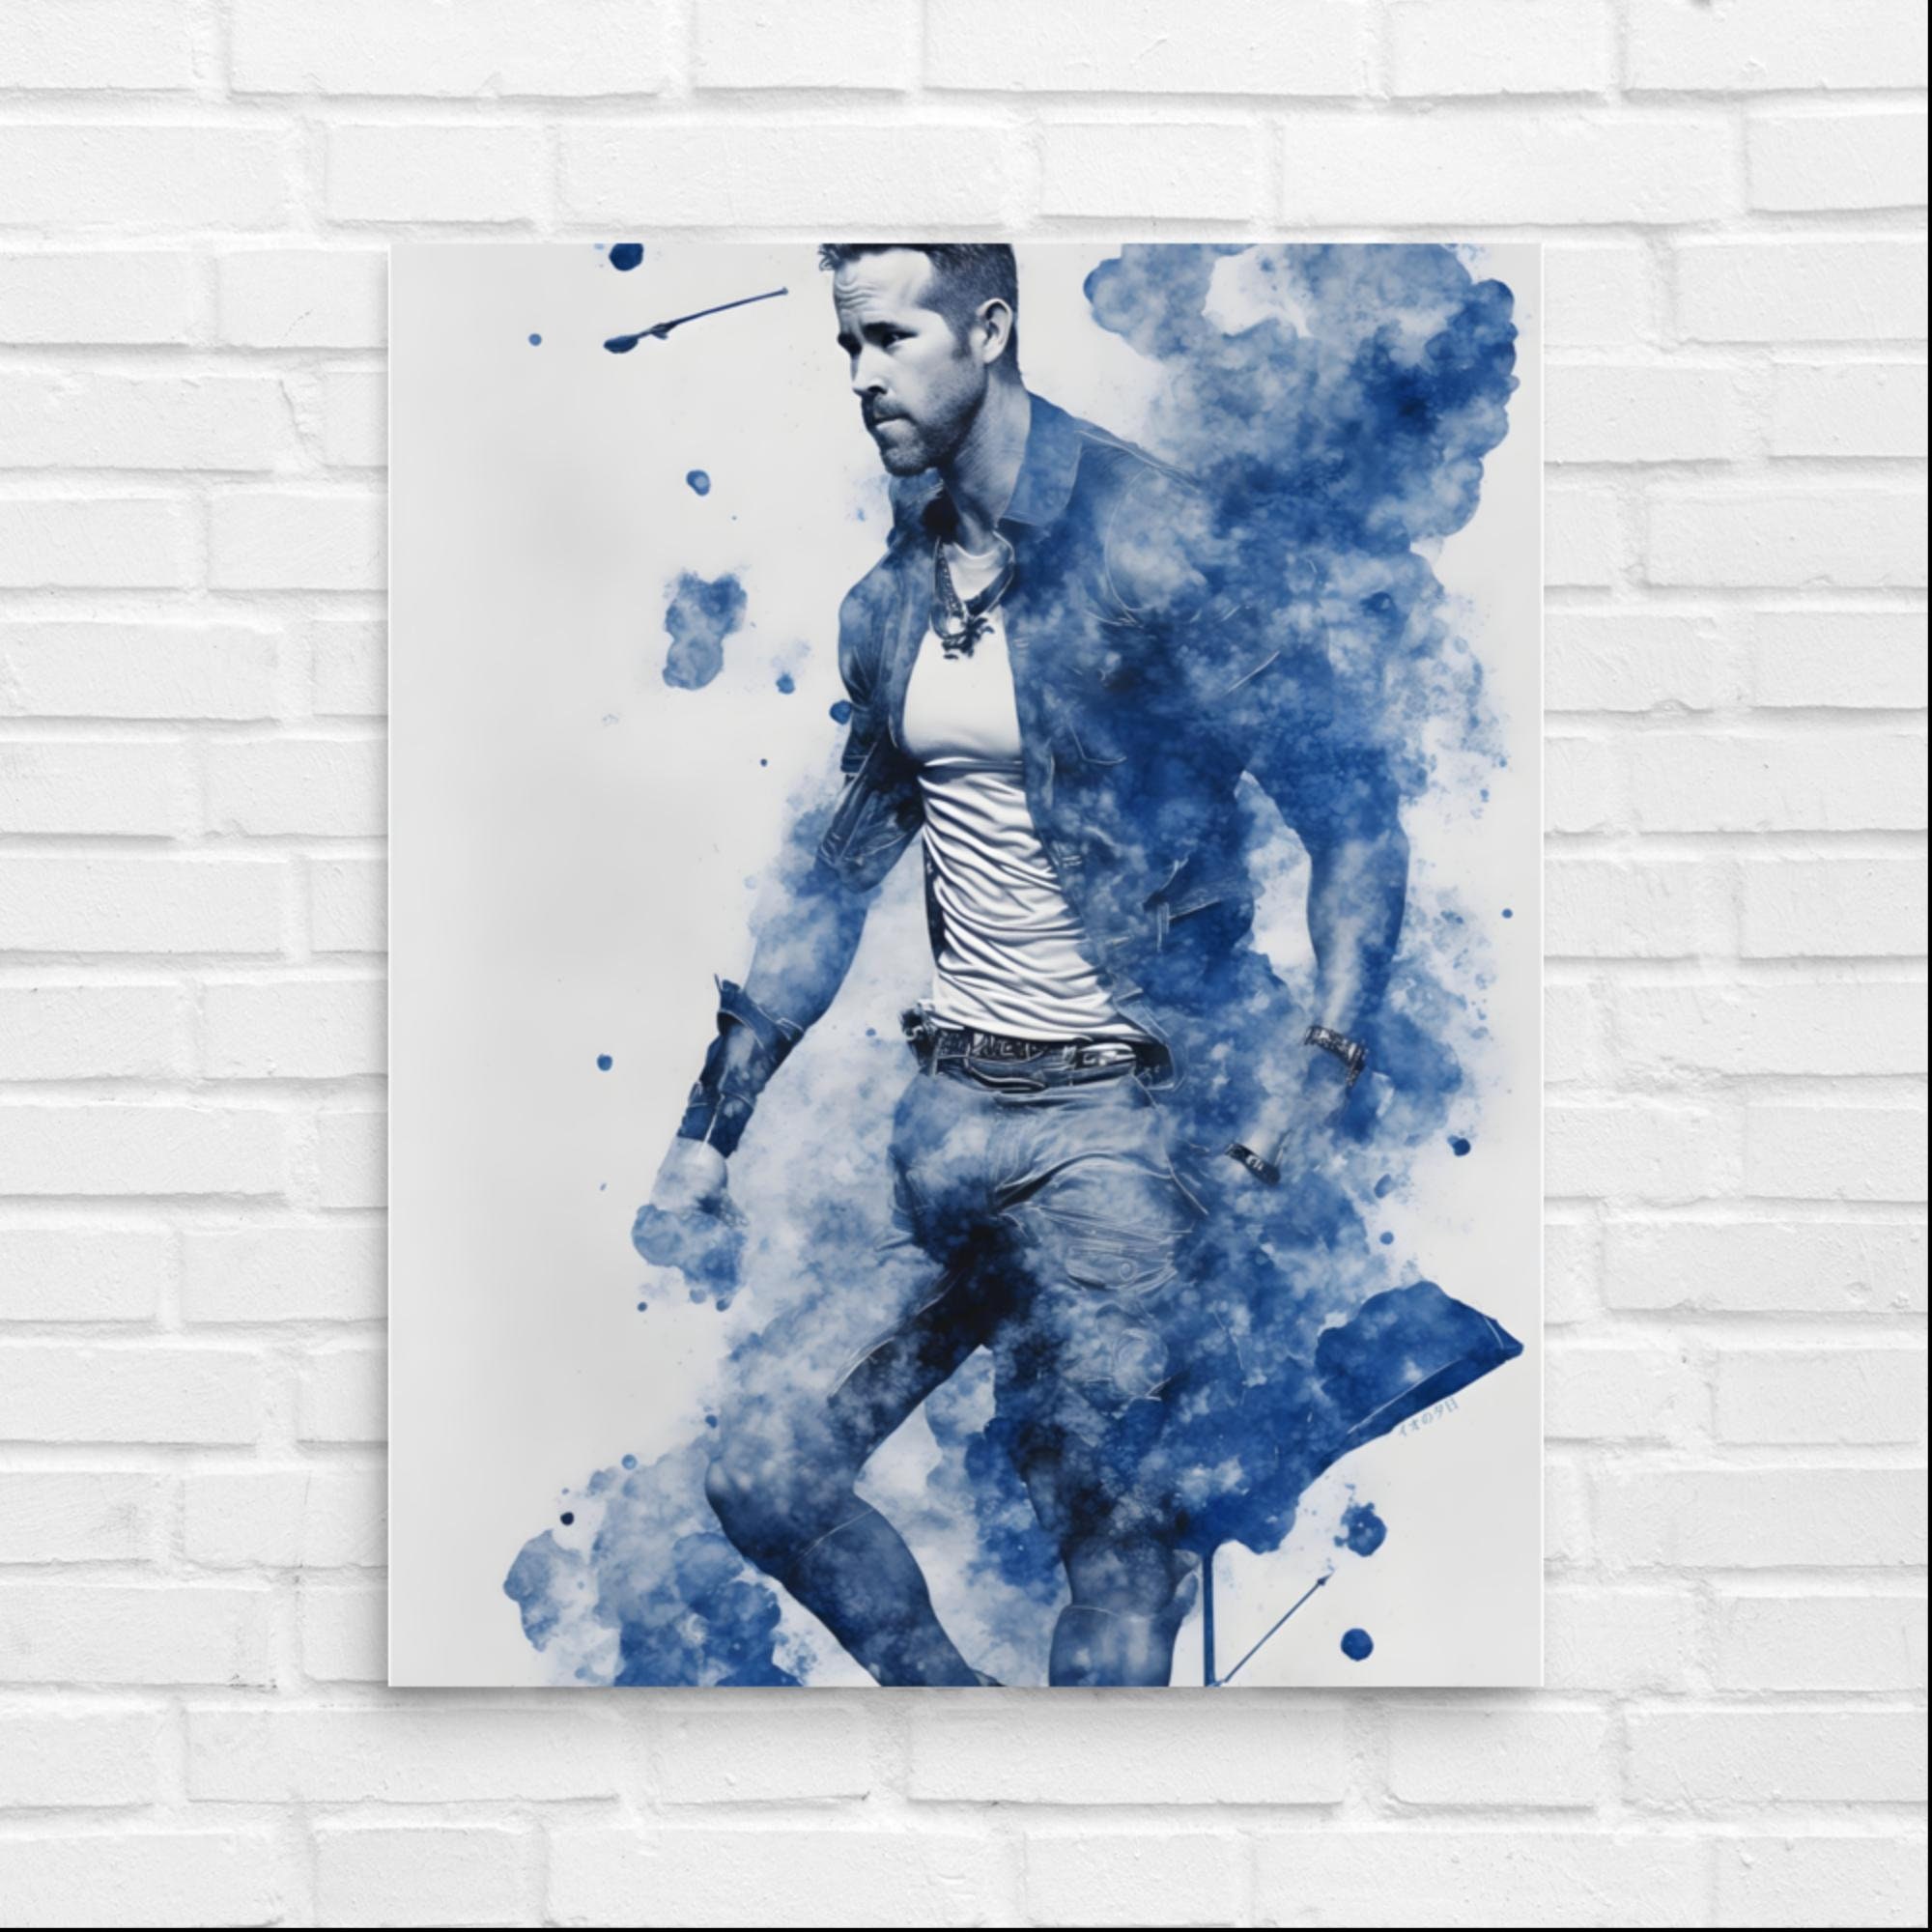 Ryan Reynolds Poster Movie Star Actor Art Canvas Poster Print Wall Painting  Home Decoration (No Frame) - AliExpress